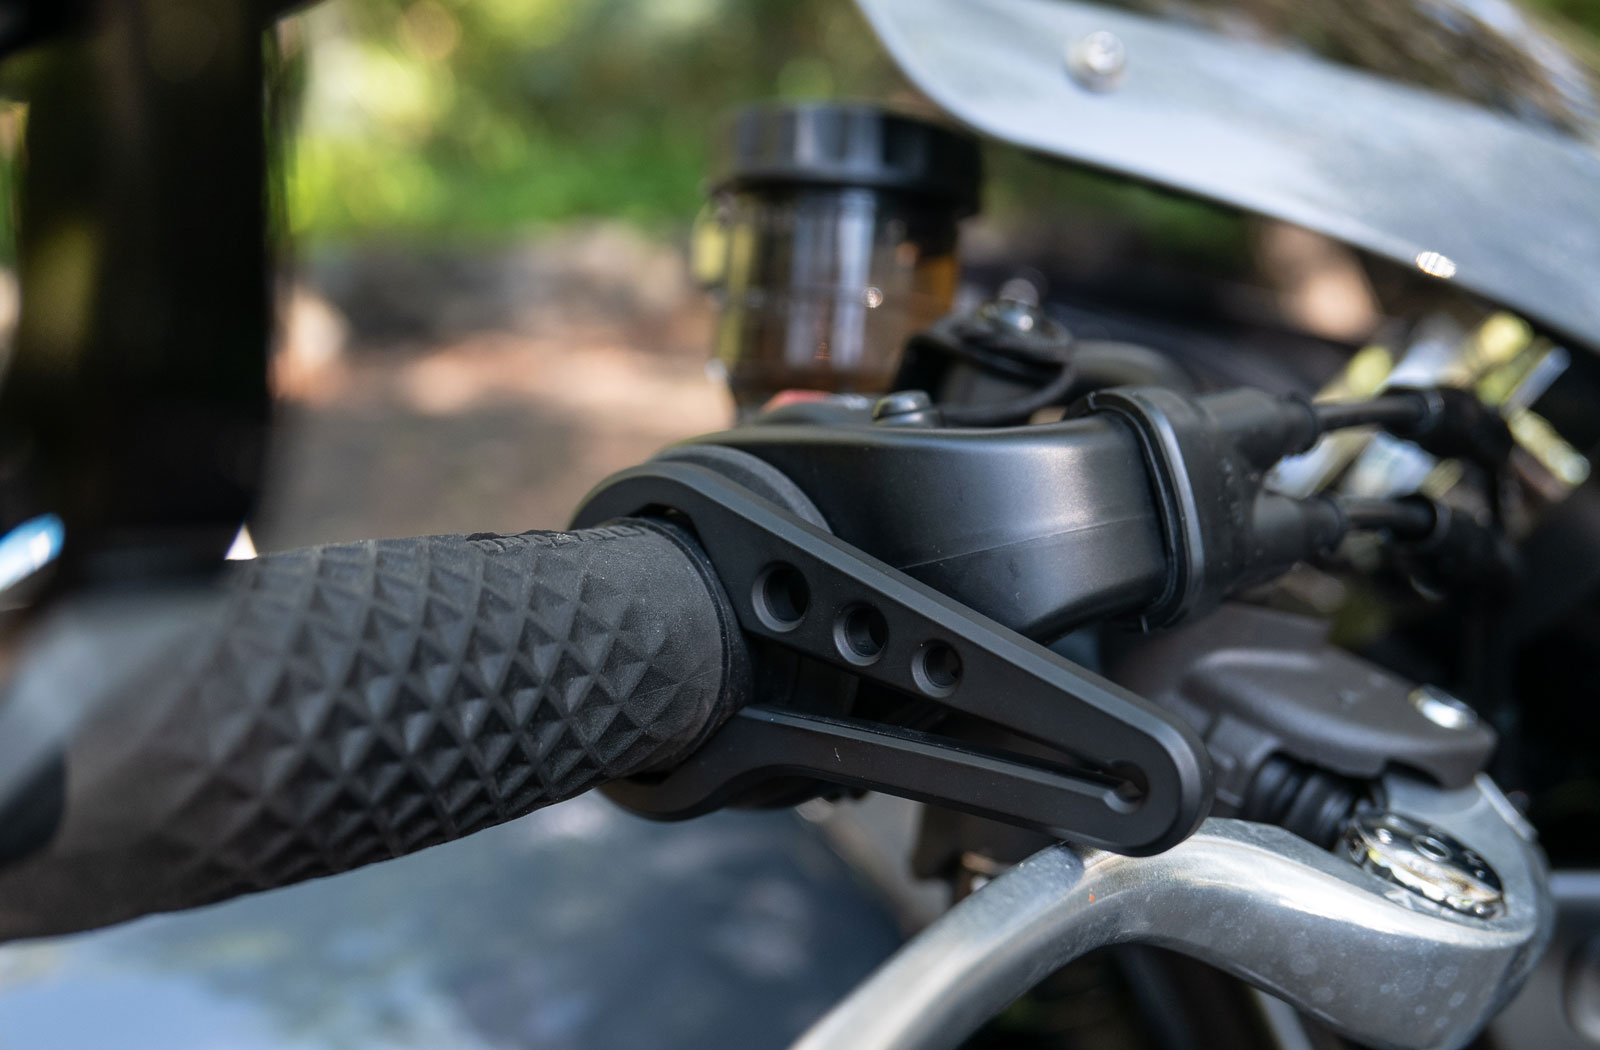 Motorcycle cruise control device